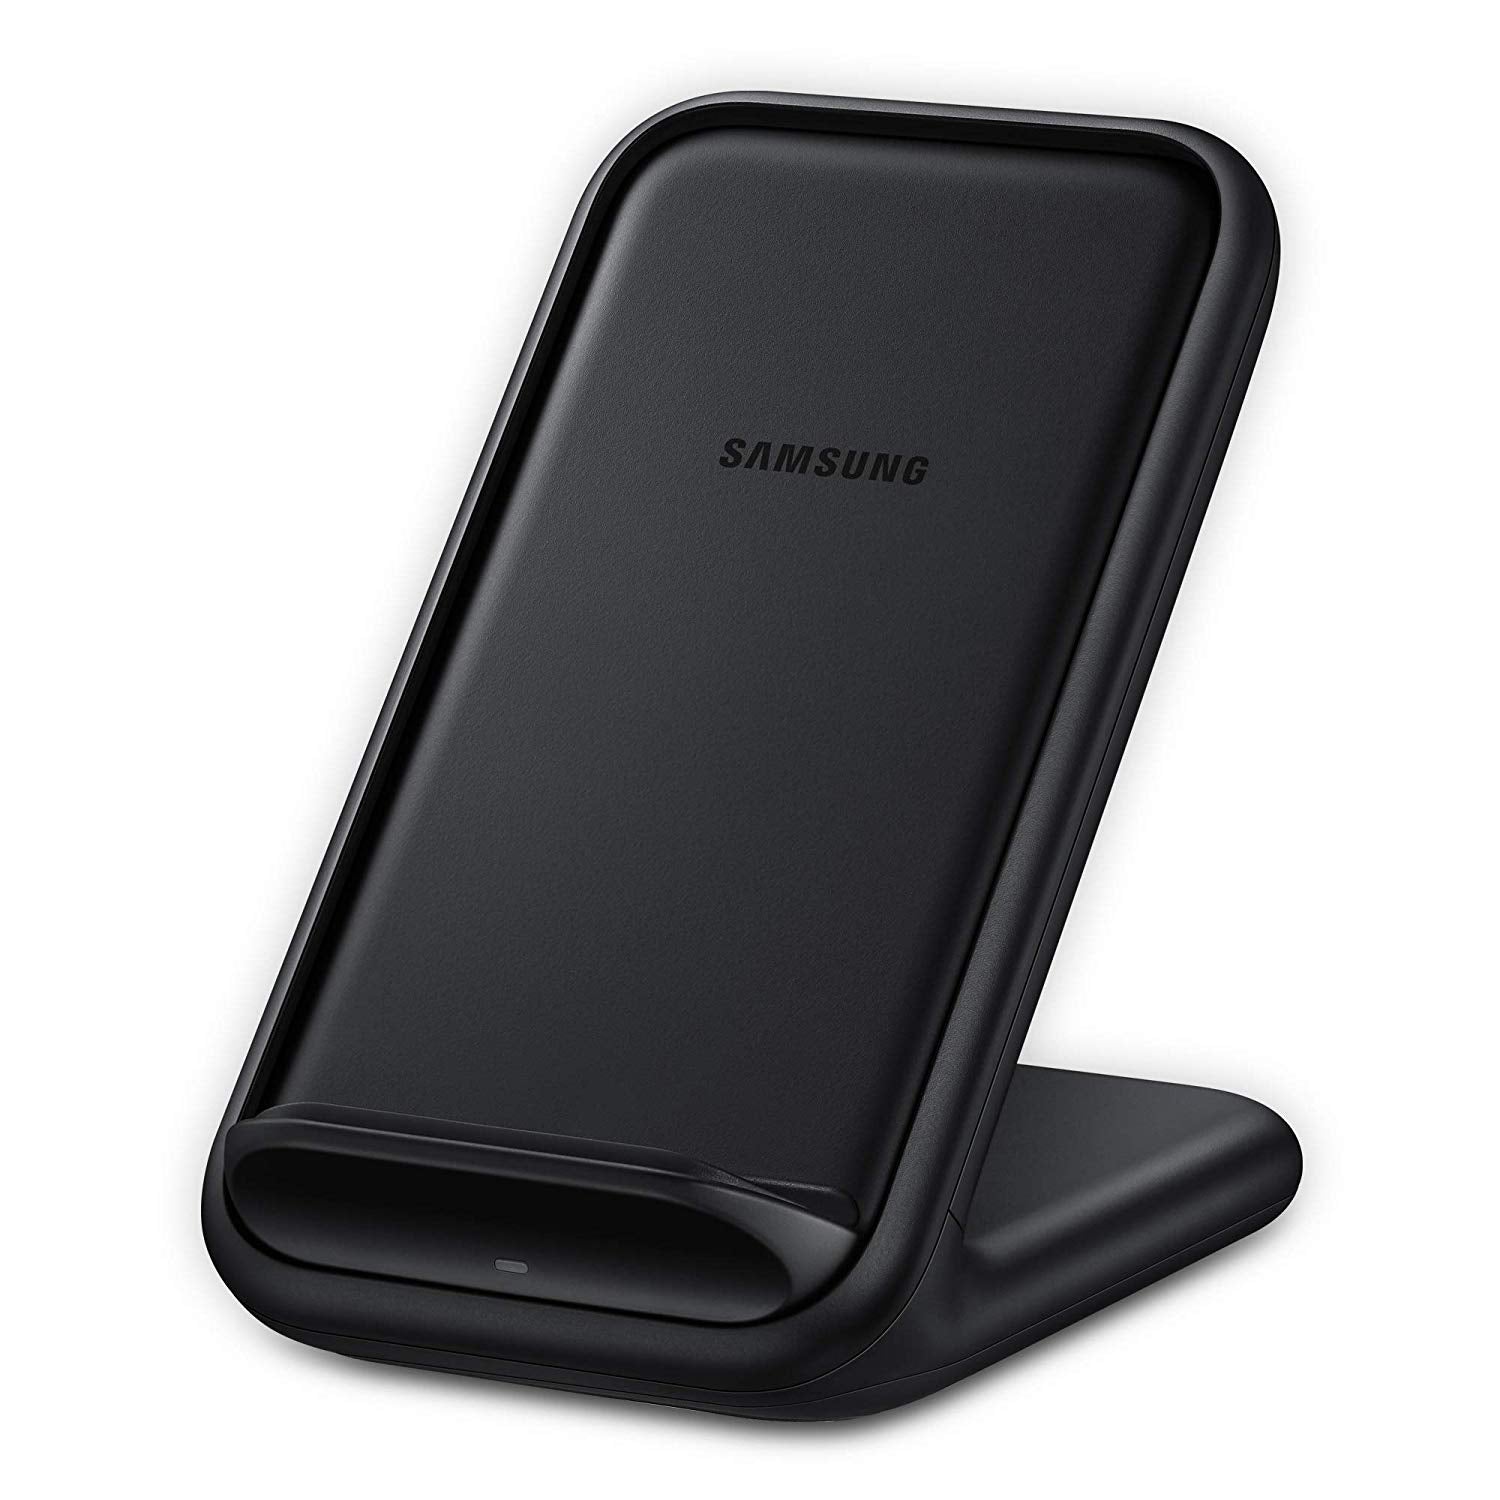 Samsung Wireless Charger Stand 2.0 for Galaxy Note10/S10 - Black (Certified Refurbished)